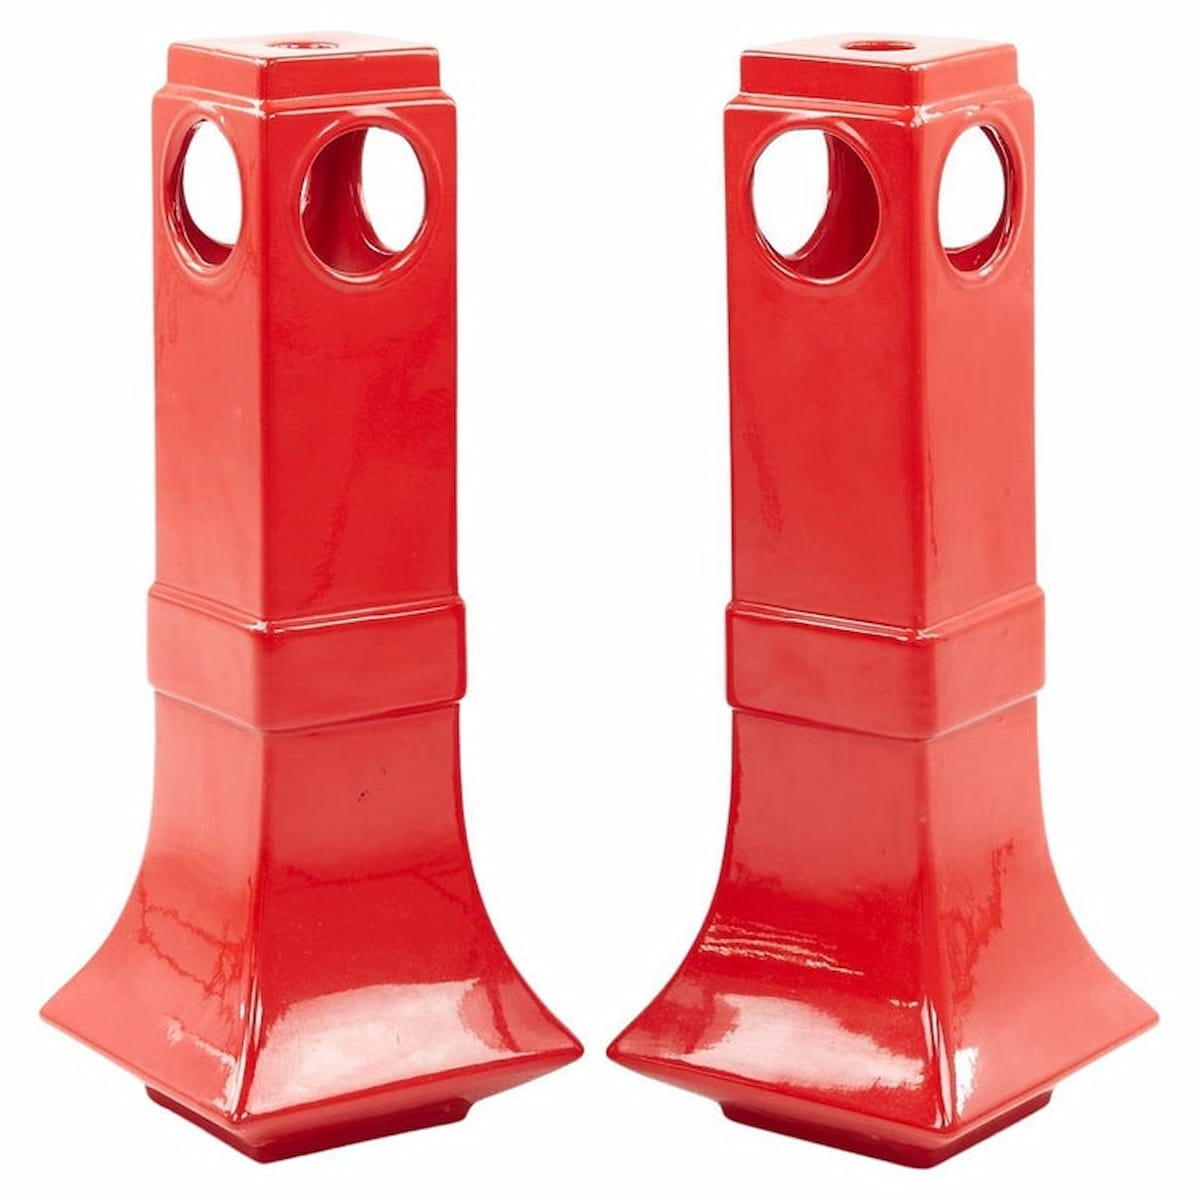 Mid Century Red Ceramic Pottery Stands - a Pair